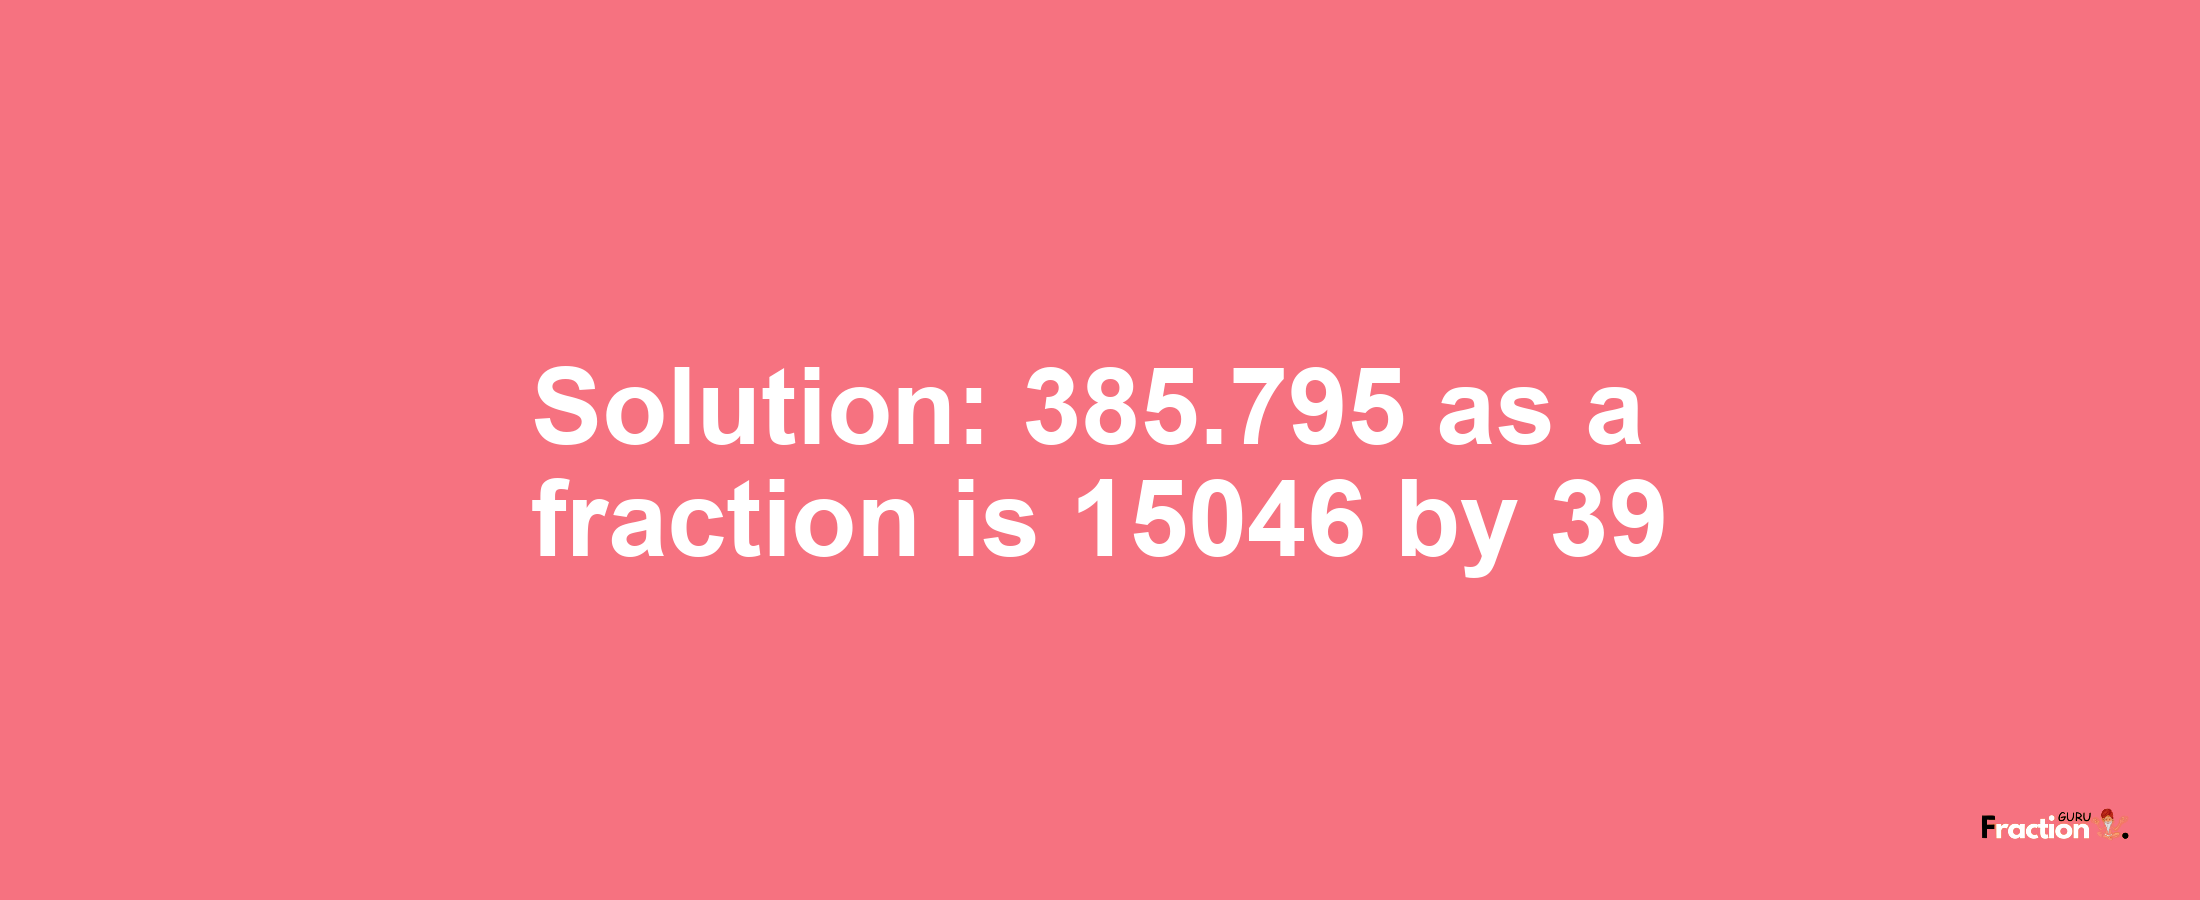 Solution:385.795 as a fraction is 15046/39